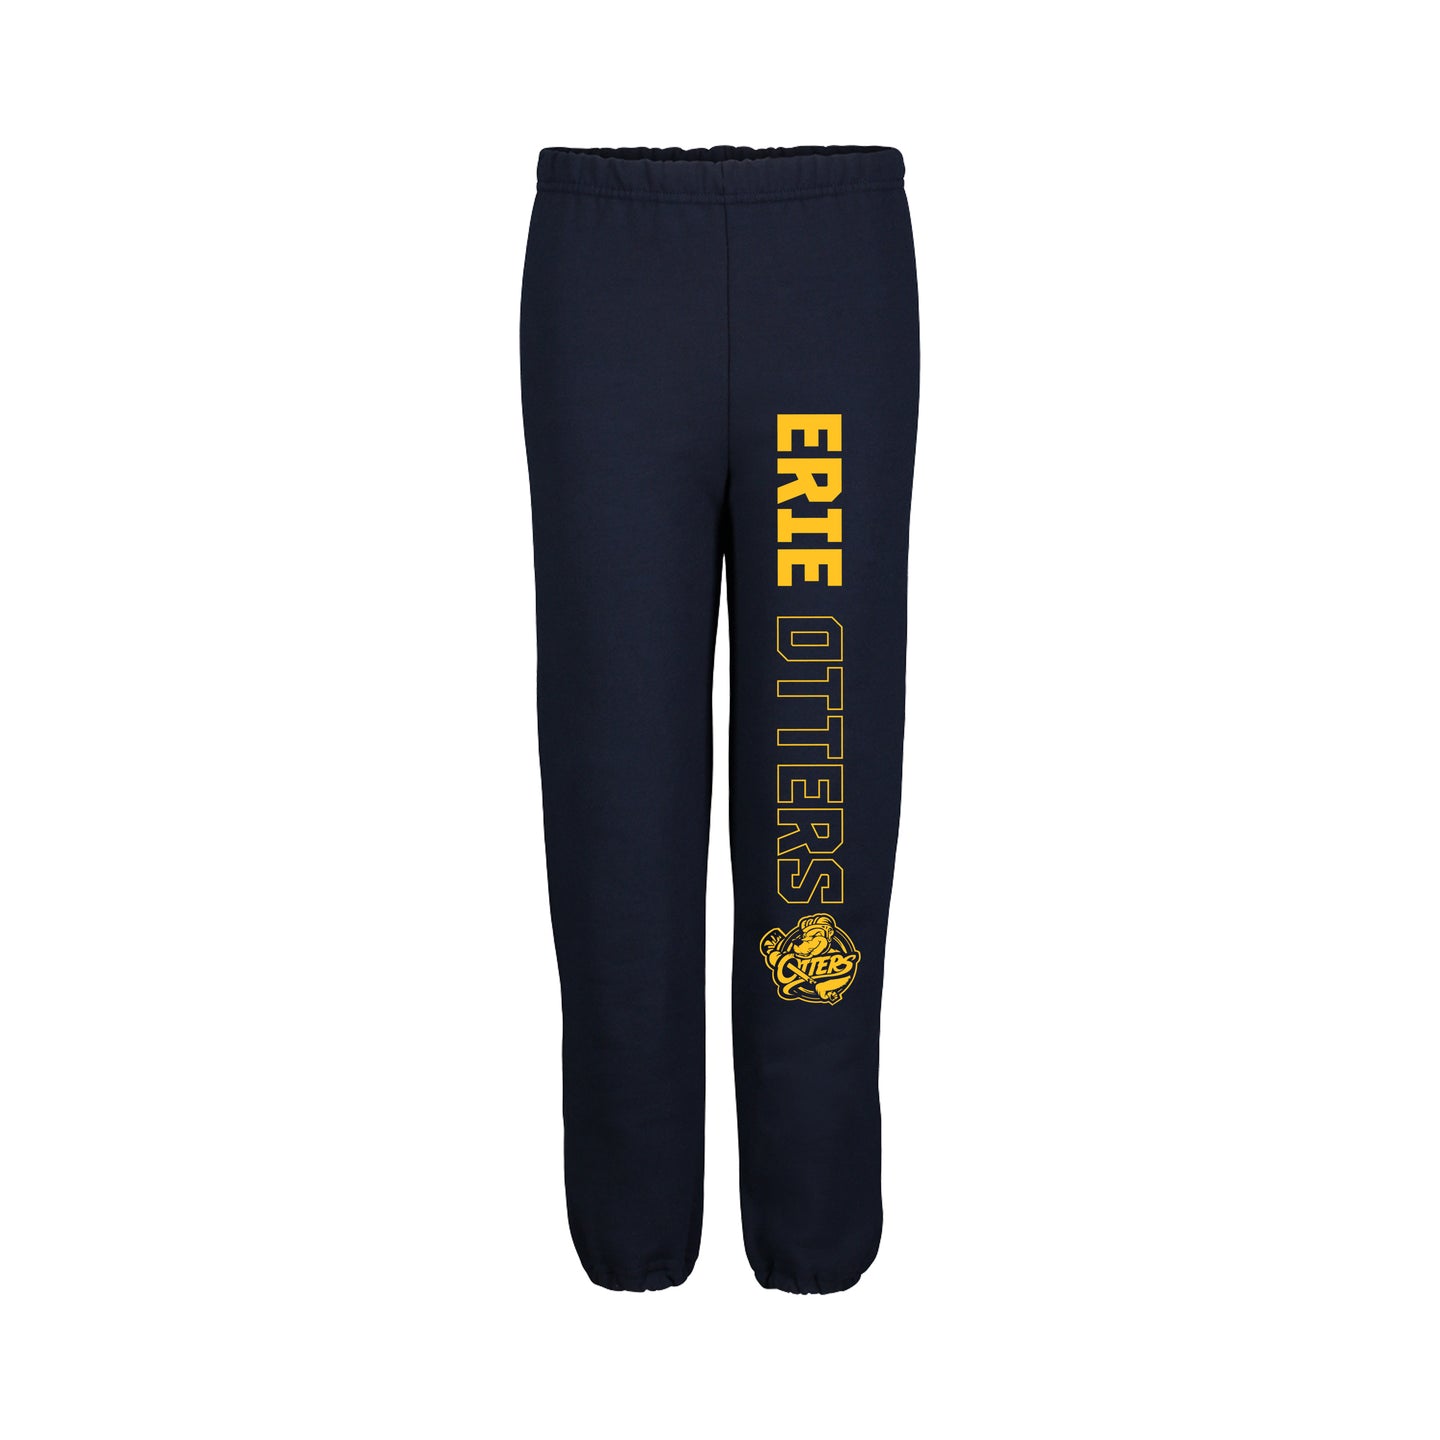 Youth Navy Sweatpants